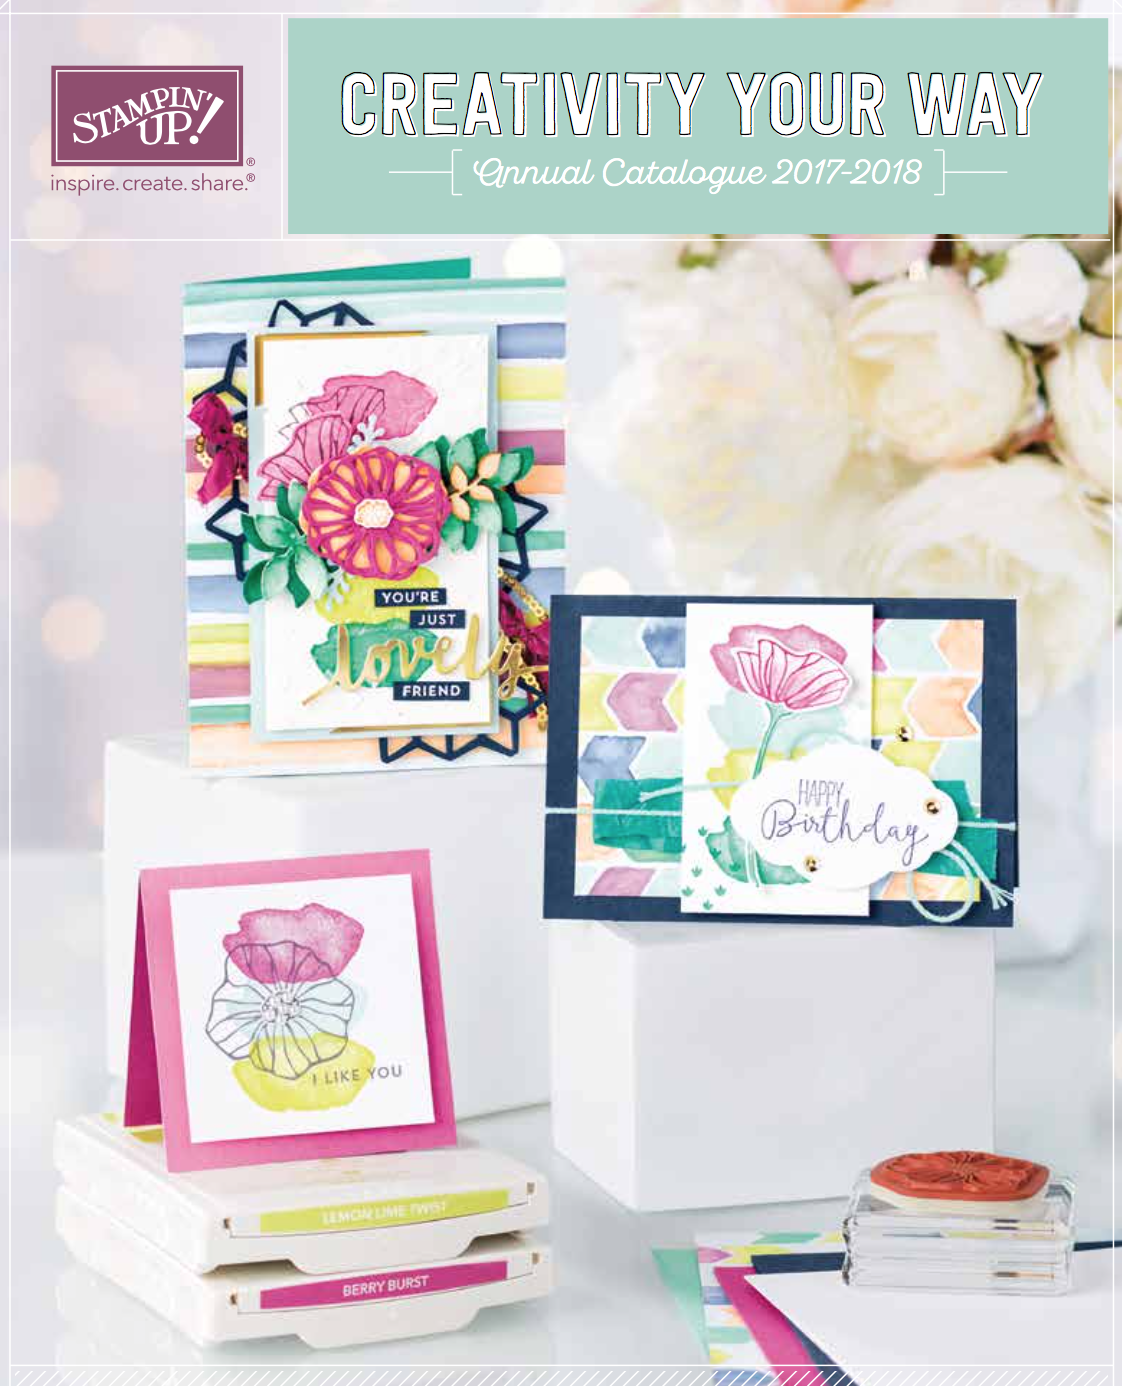 BRAND NEW STAMPIN’ UP! CATALOGUE IS HERE